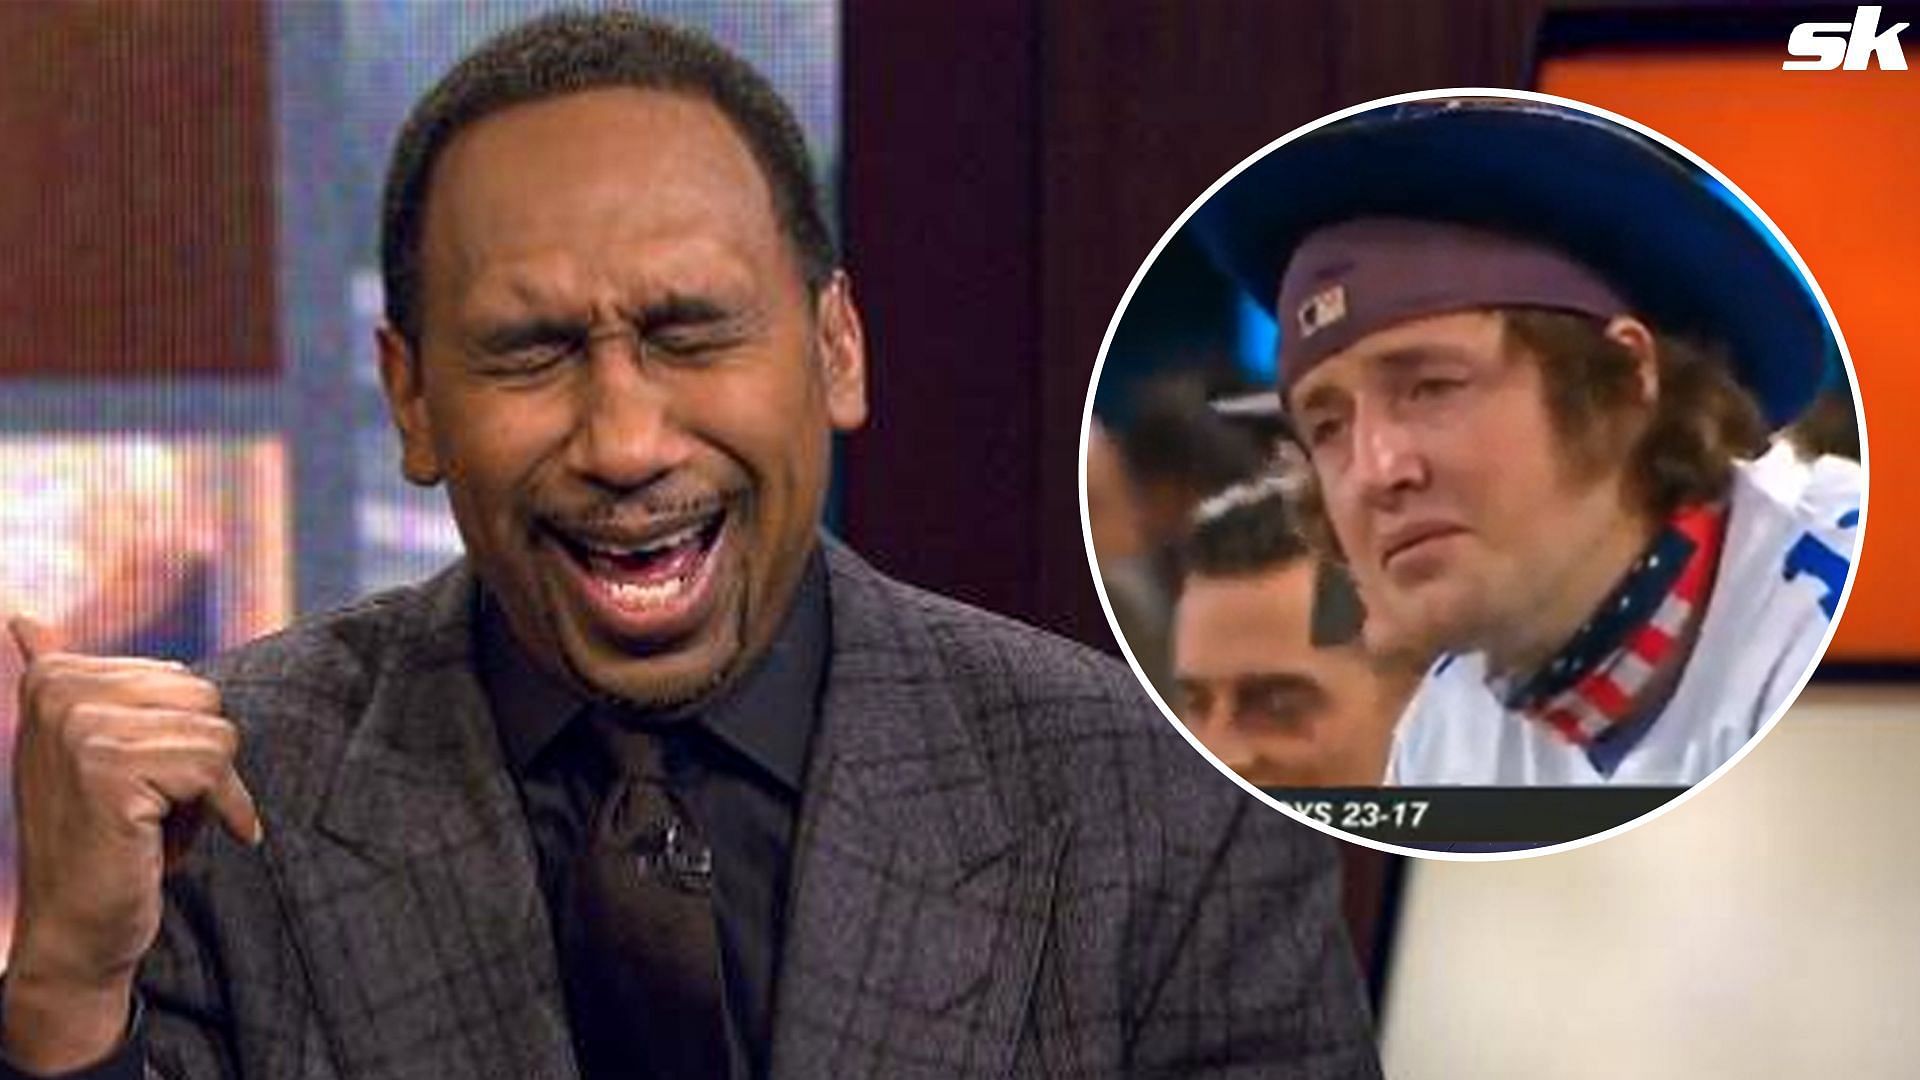 Stephen A. Smith laughs at Cowboys fan crying after loss to 49ers